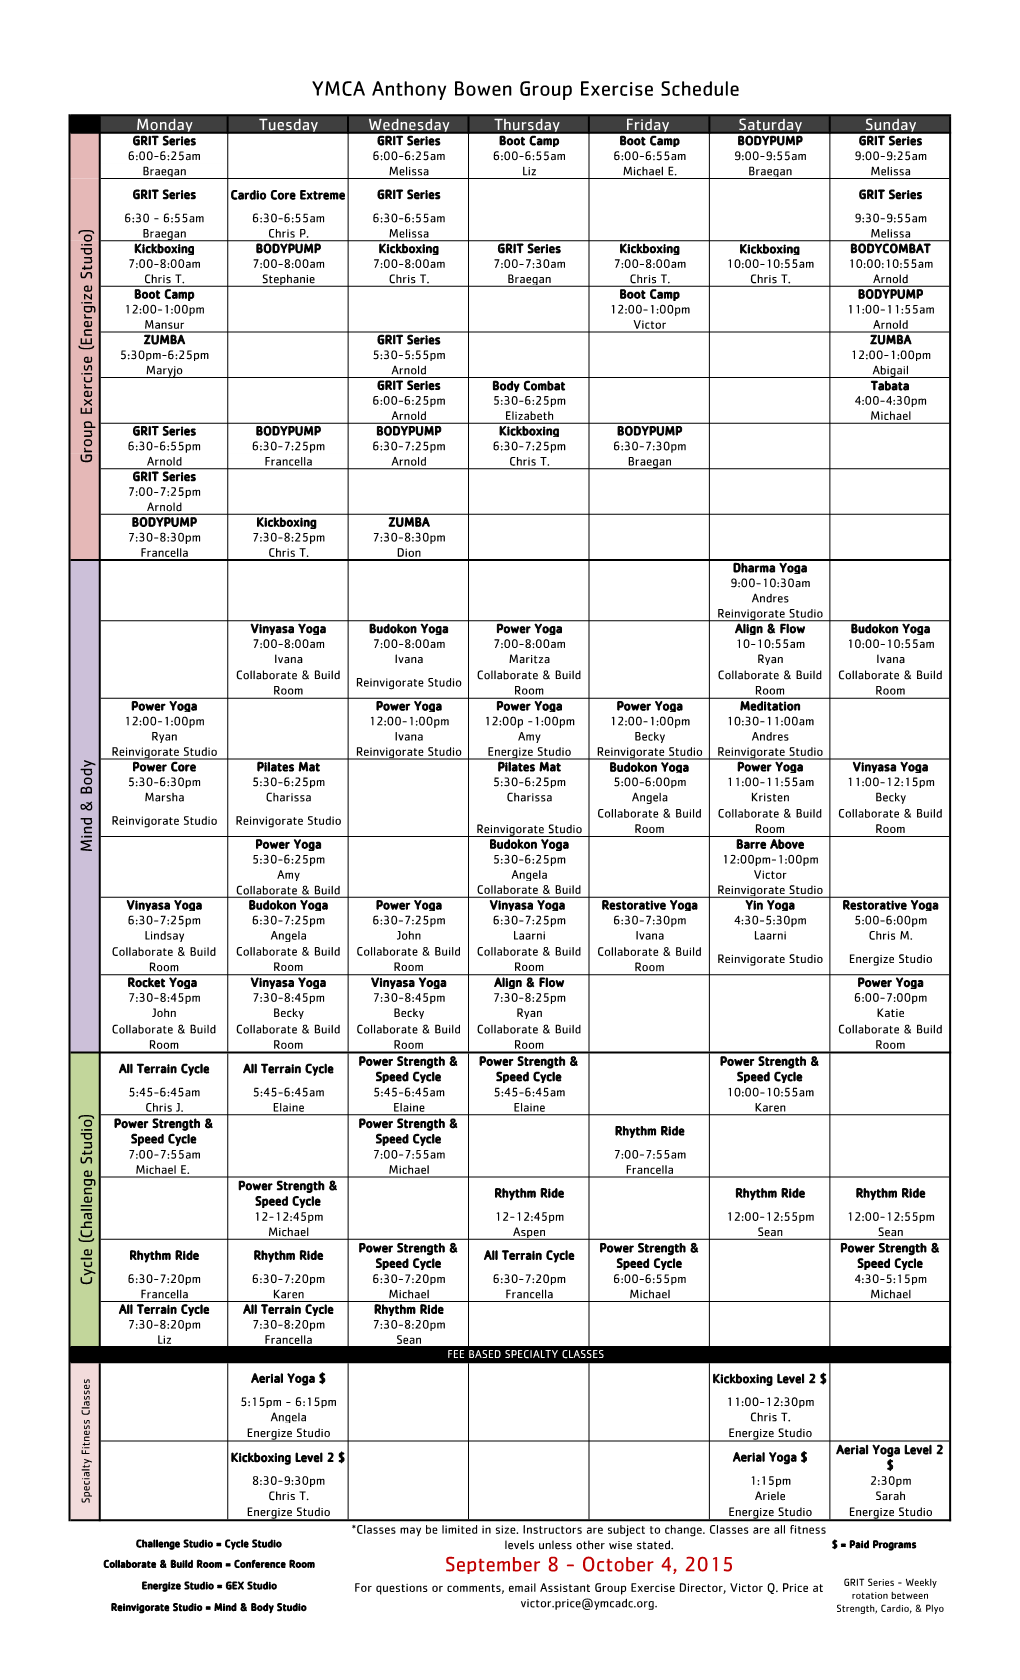 YMCA Anthony Bowen Group Exercise Schedule September 8